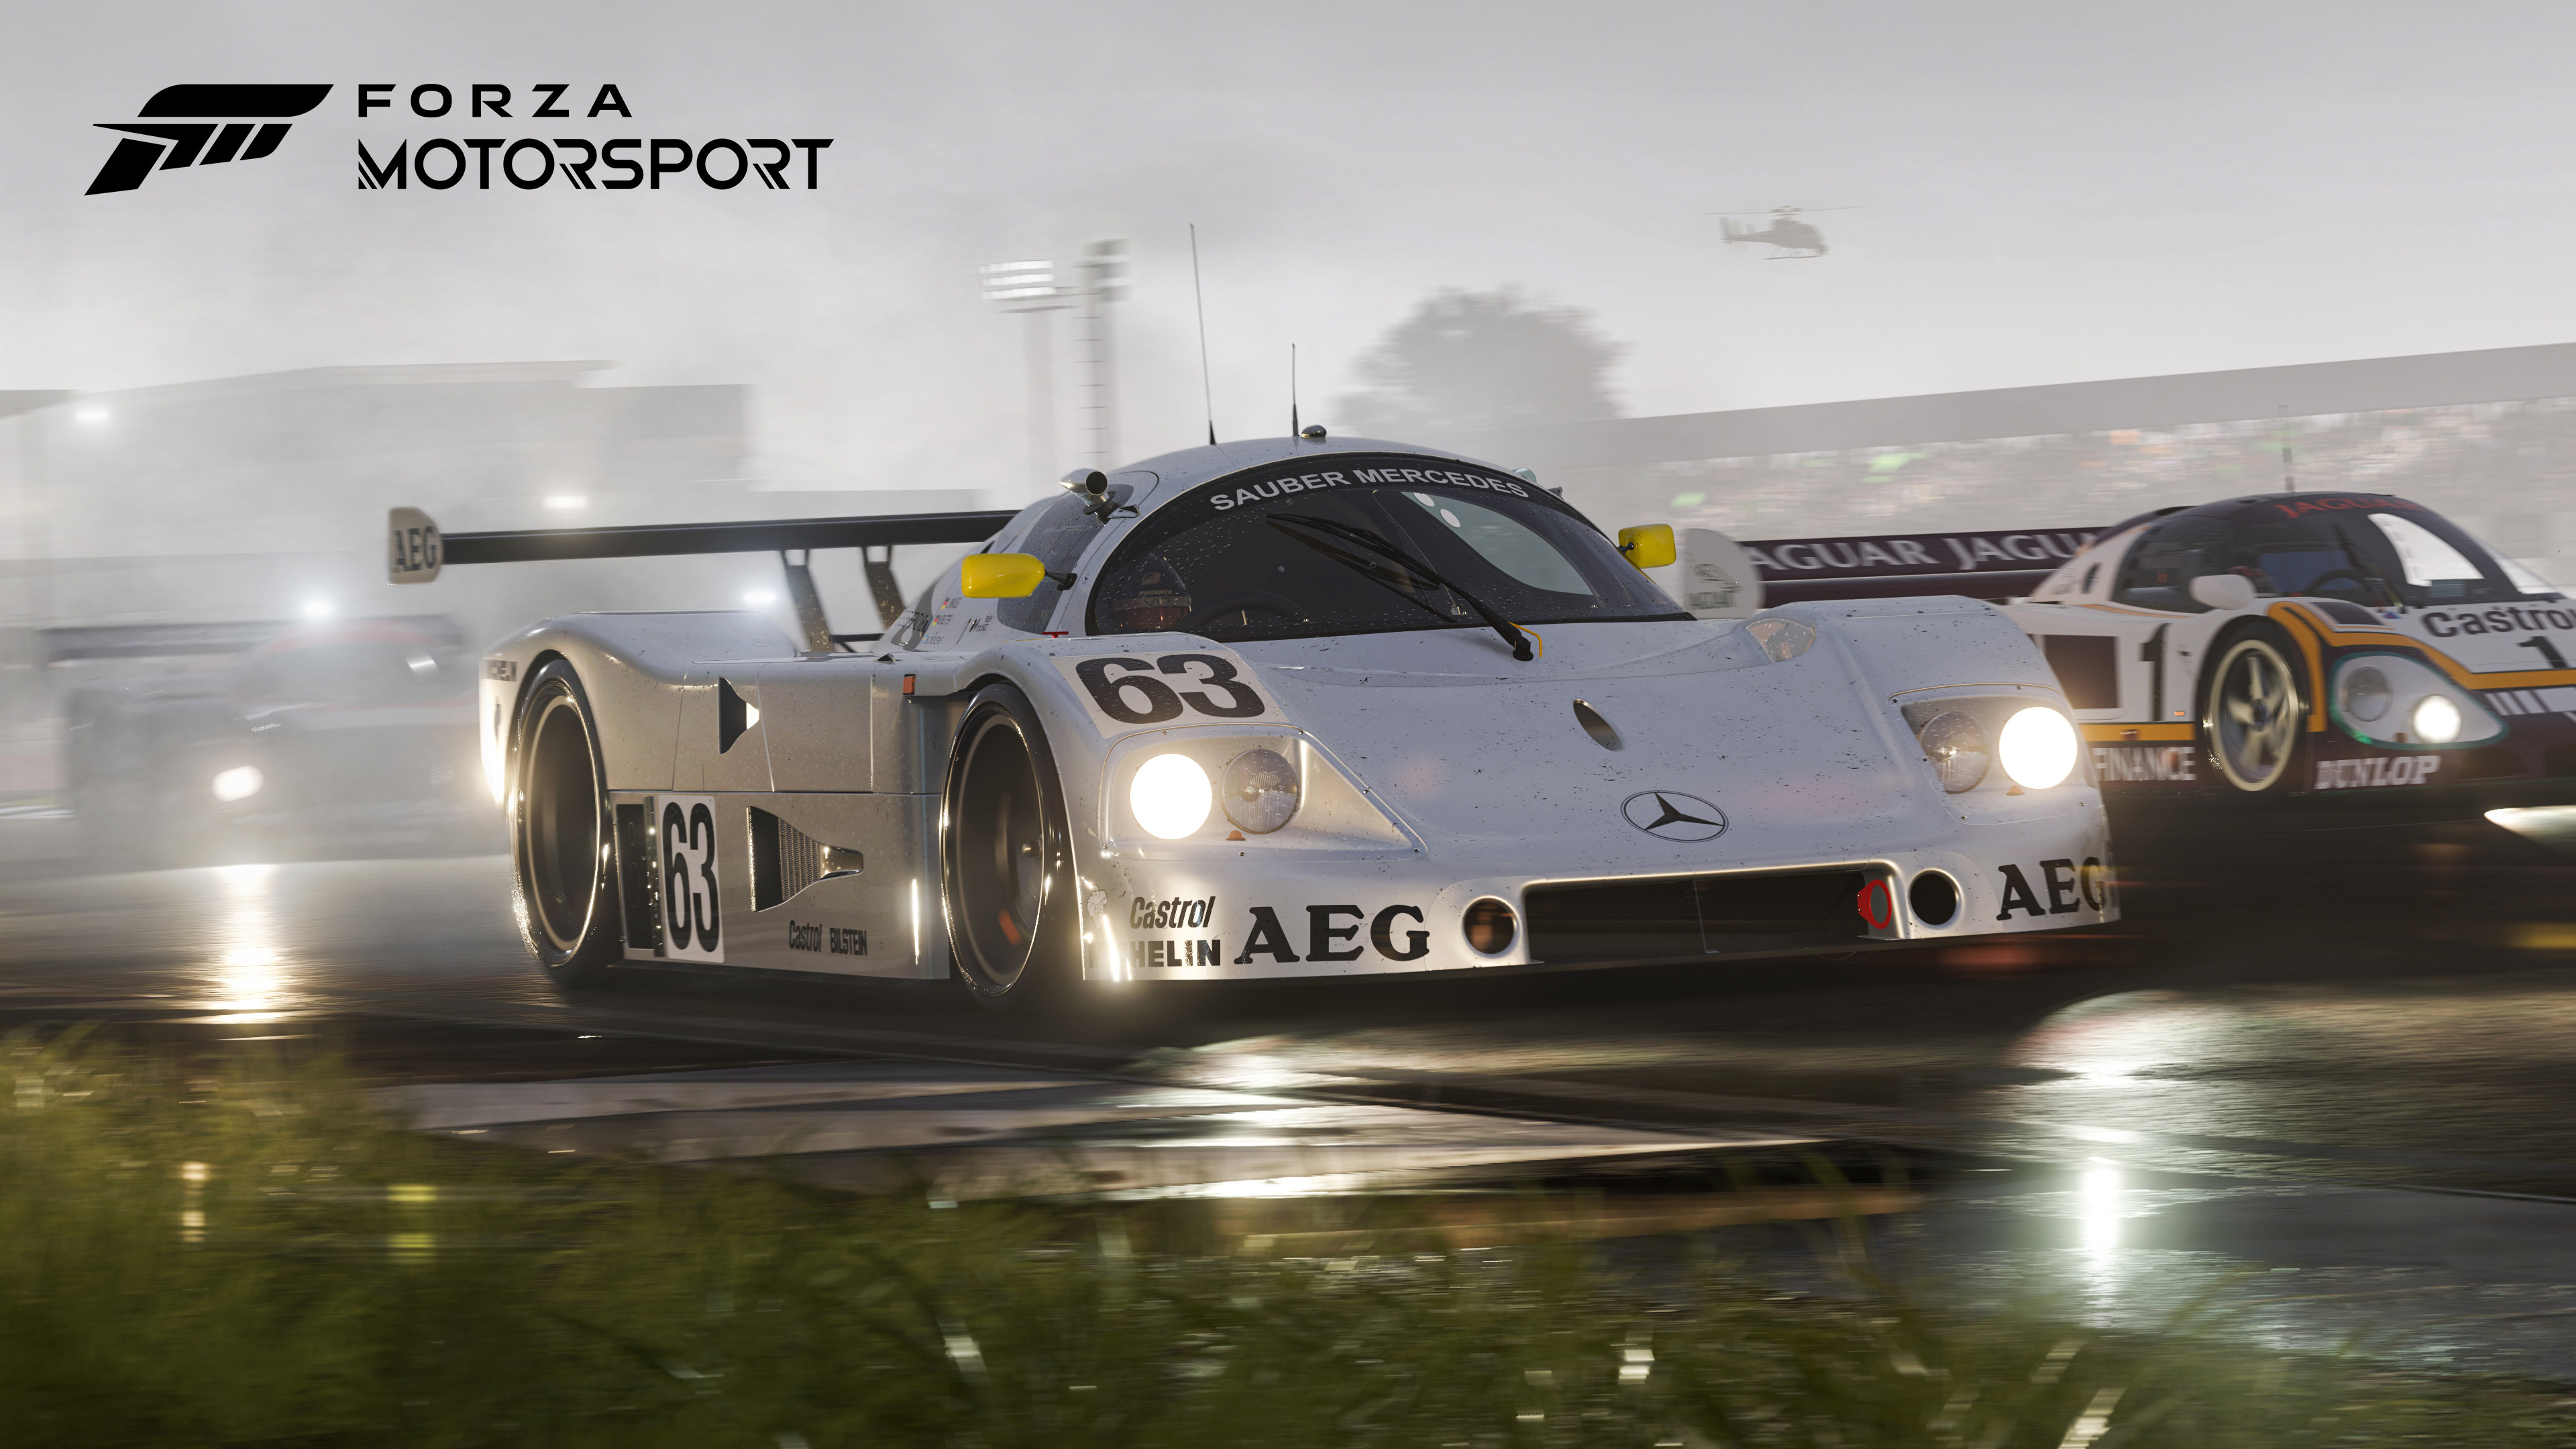 Here are some brand new beautiful 4K screenshots for Forza Motorsport